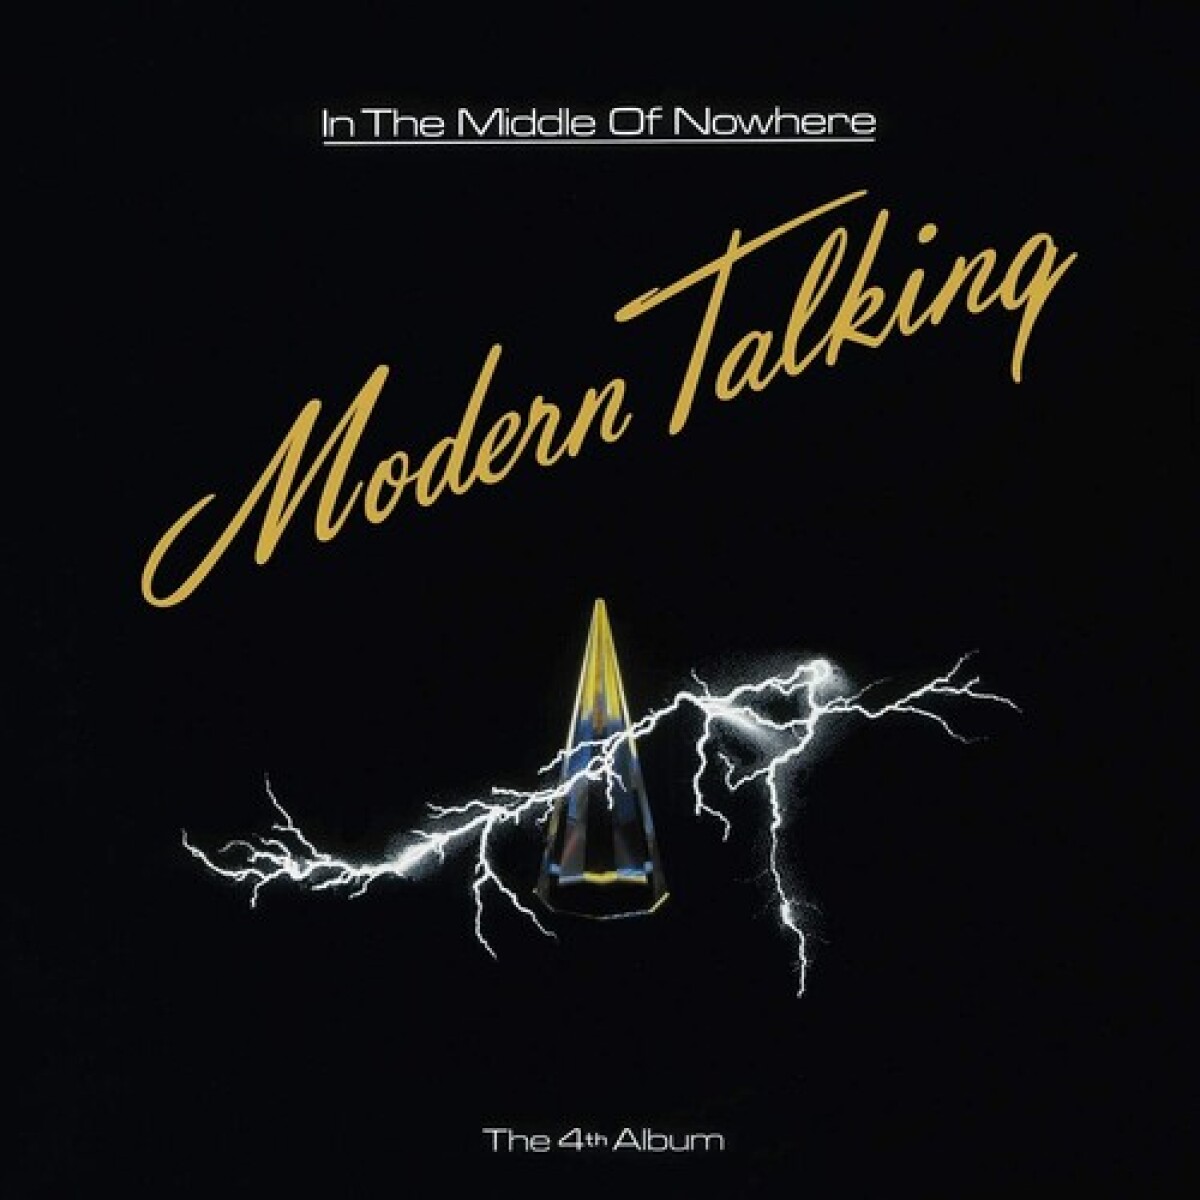 Modern Talking - In The Middle Of Nowhere 